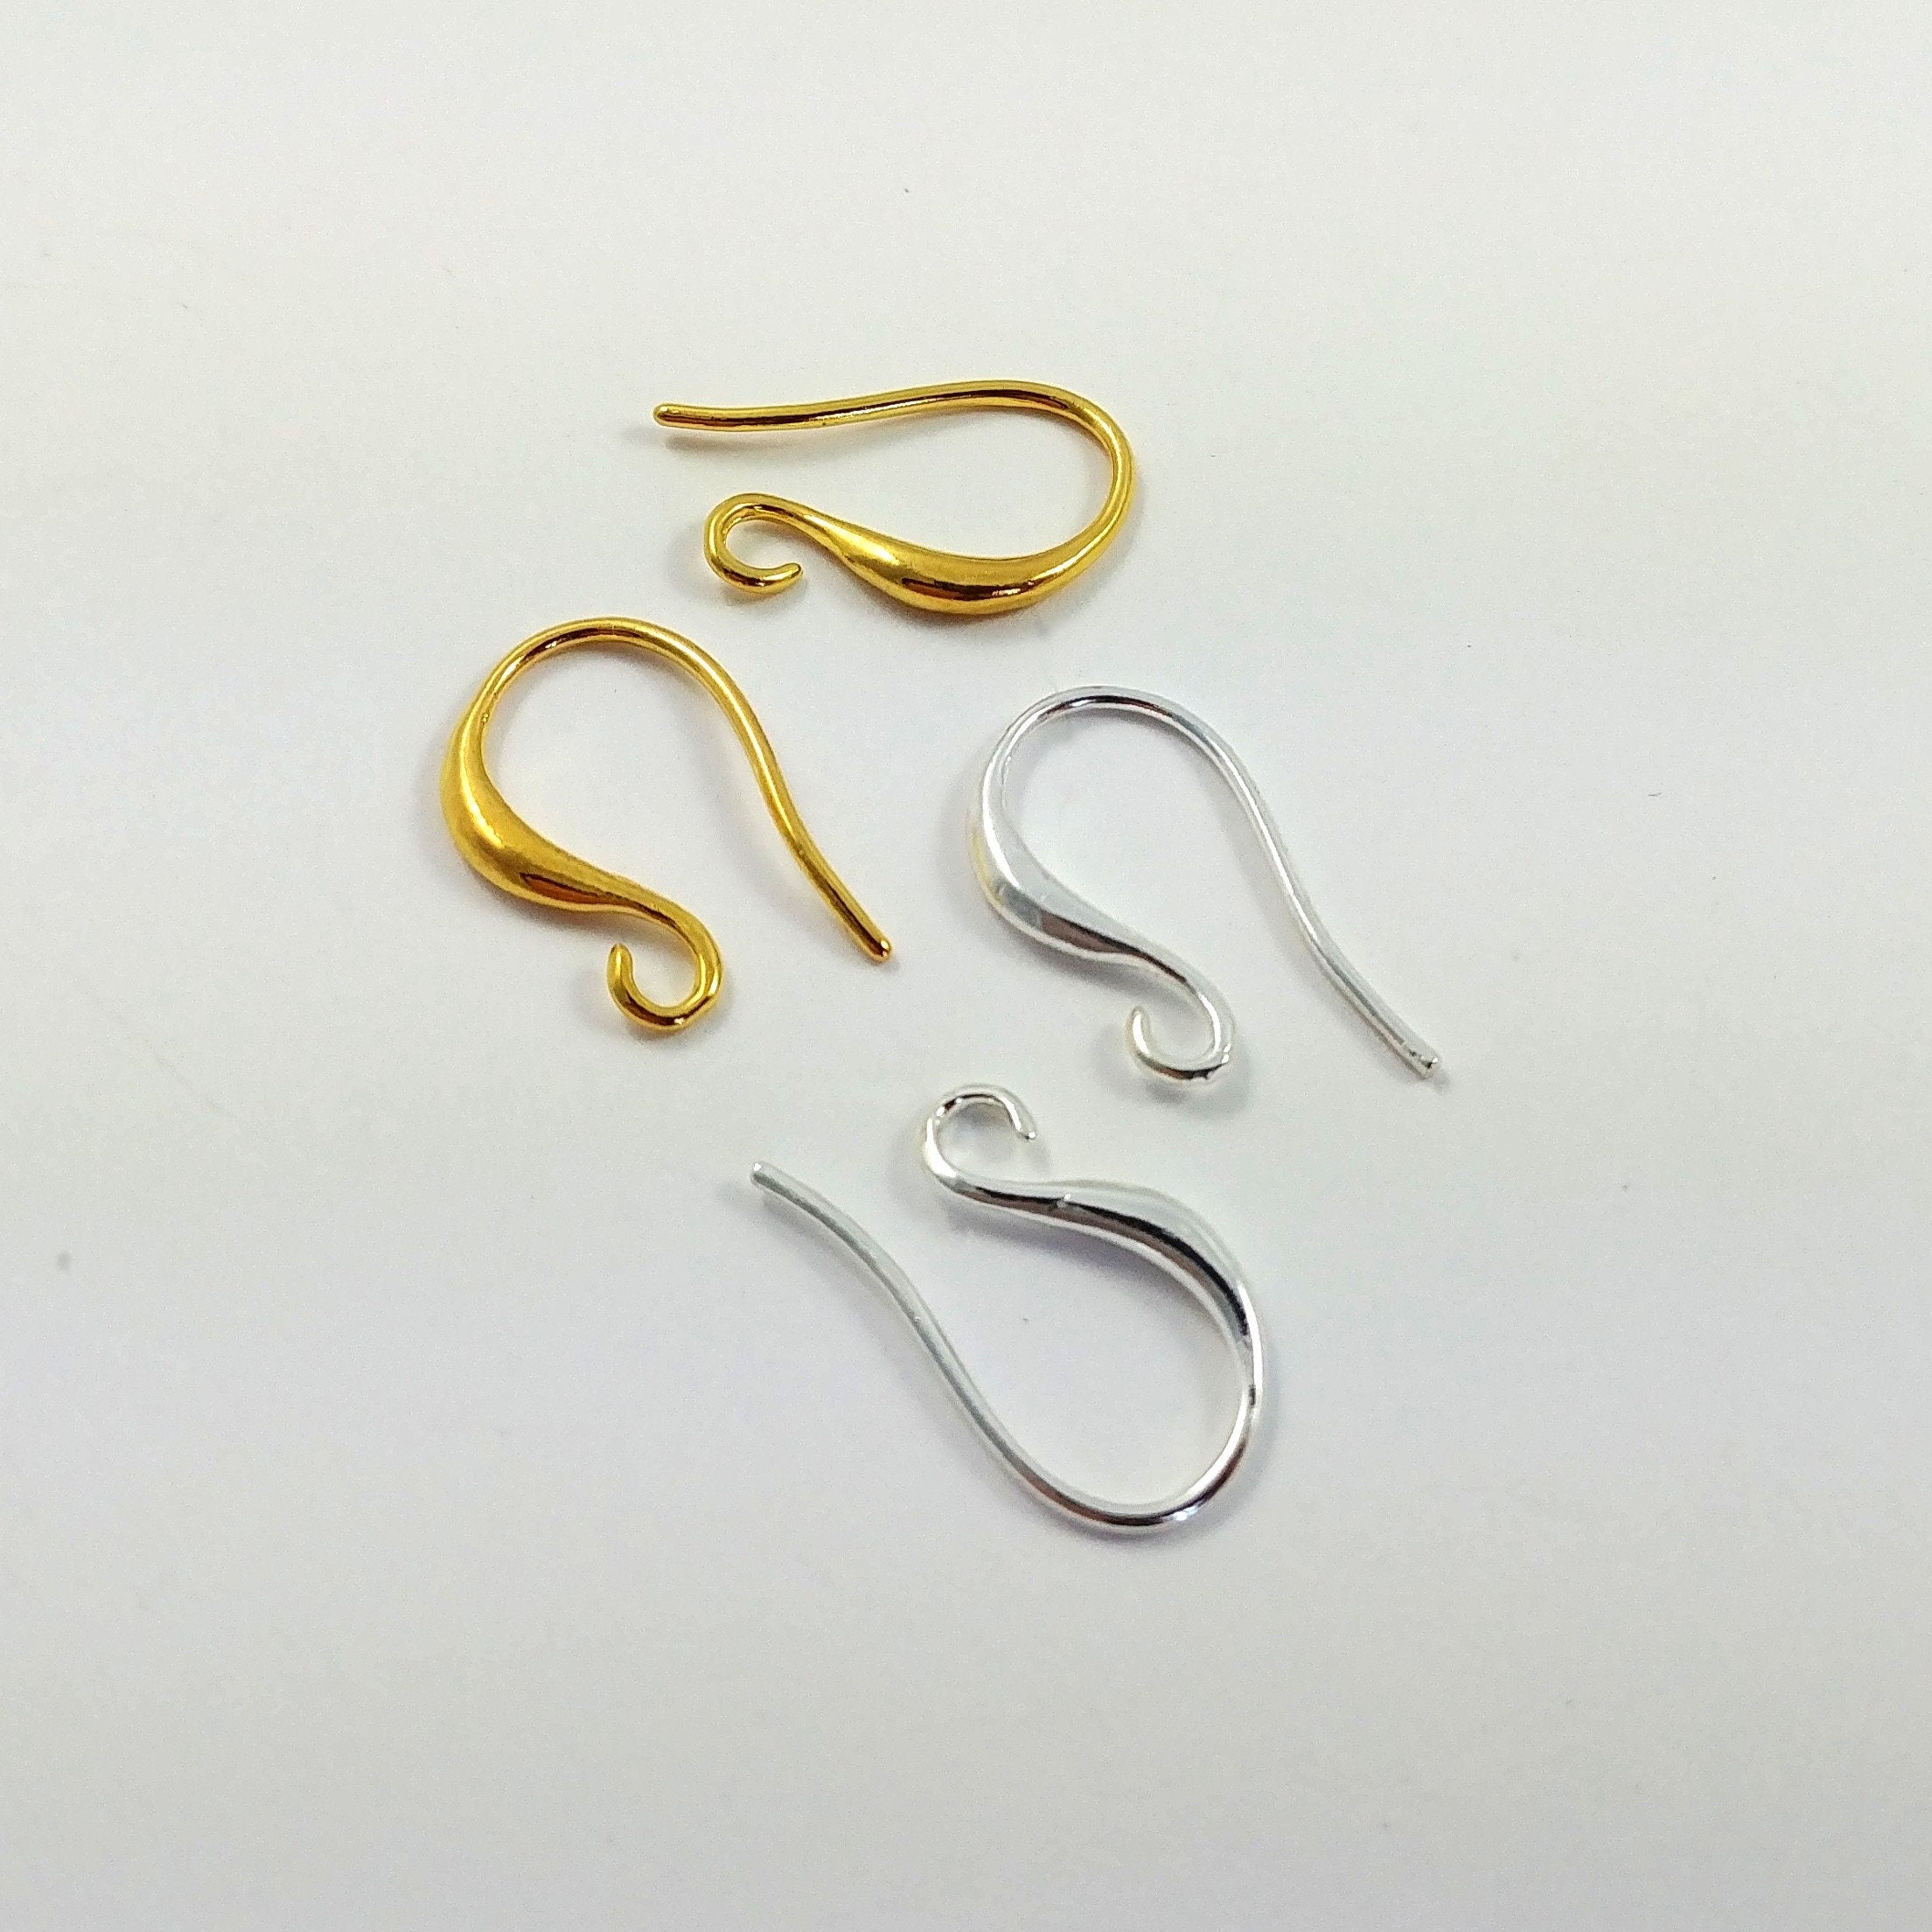 300pcs Hypoallergenic Silver And Gold Color Earring Hooks Set, Earring  Making Supplies With Low Allergy Hooks, Earring Backs, And Jump Rings For  Jewelry Making